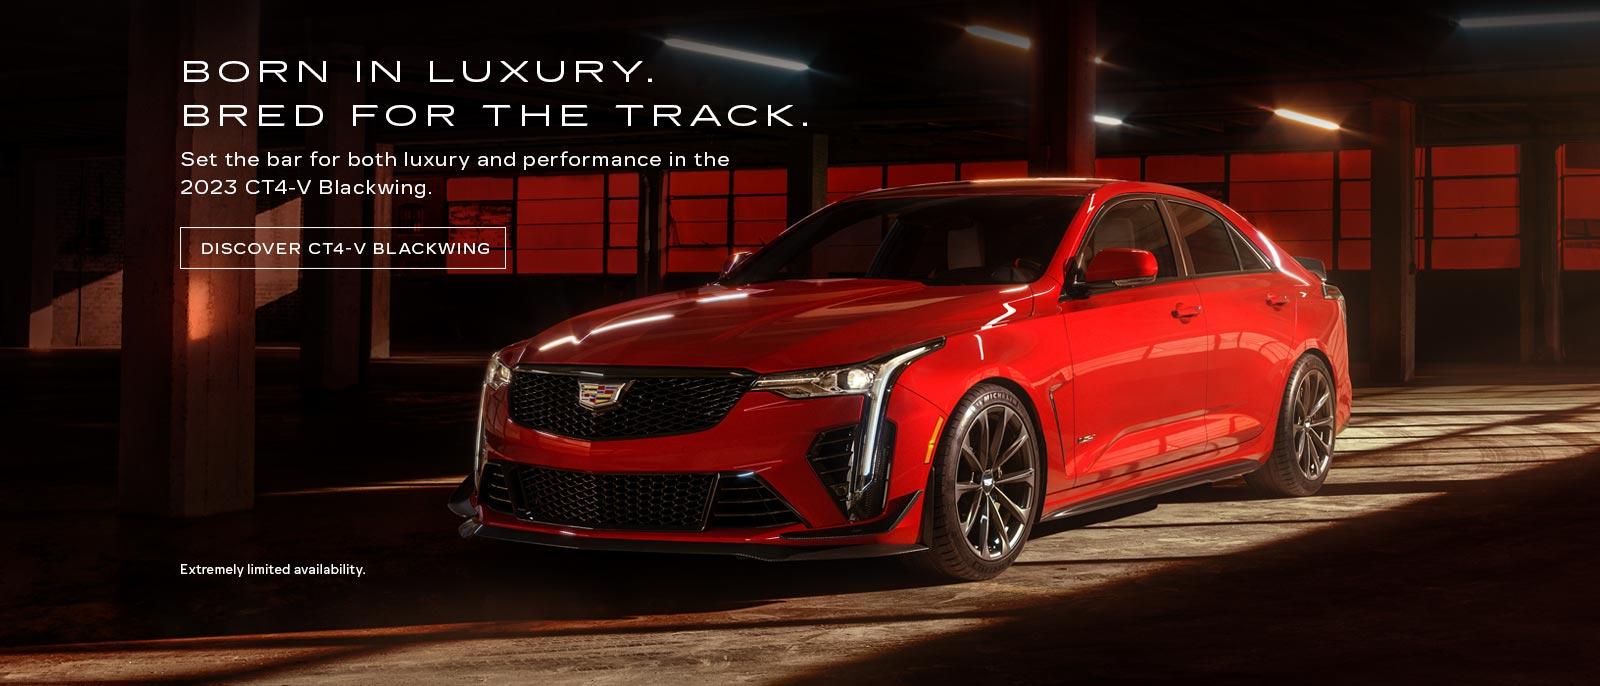 Born in Luxury. Bred for the Track. Set the bar for both luxury and performance in the 2023 CT4-V Blackwing.